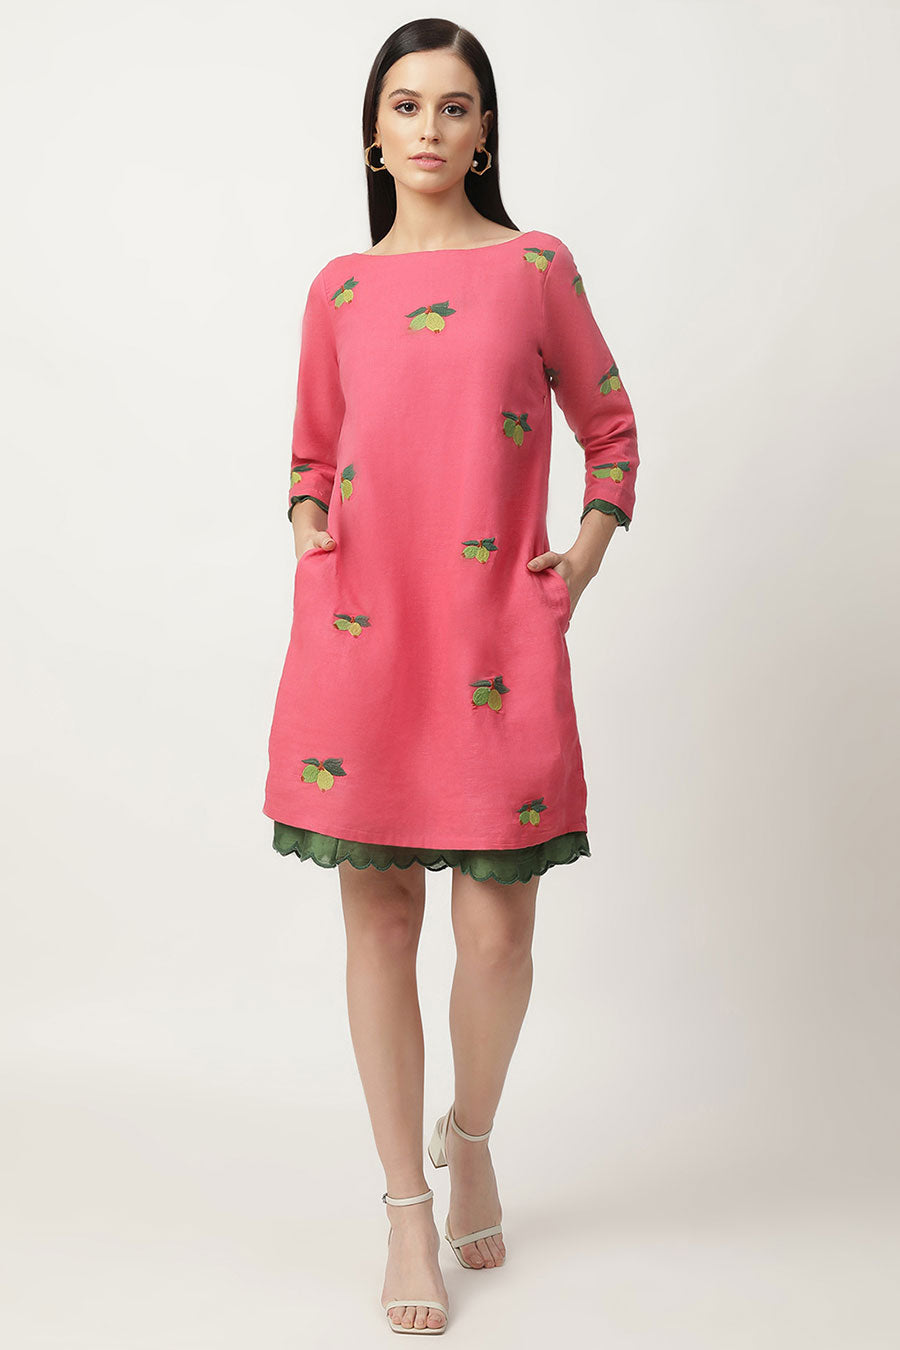 Candy Pink Embroidered Dress